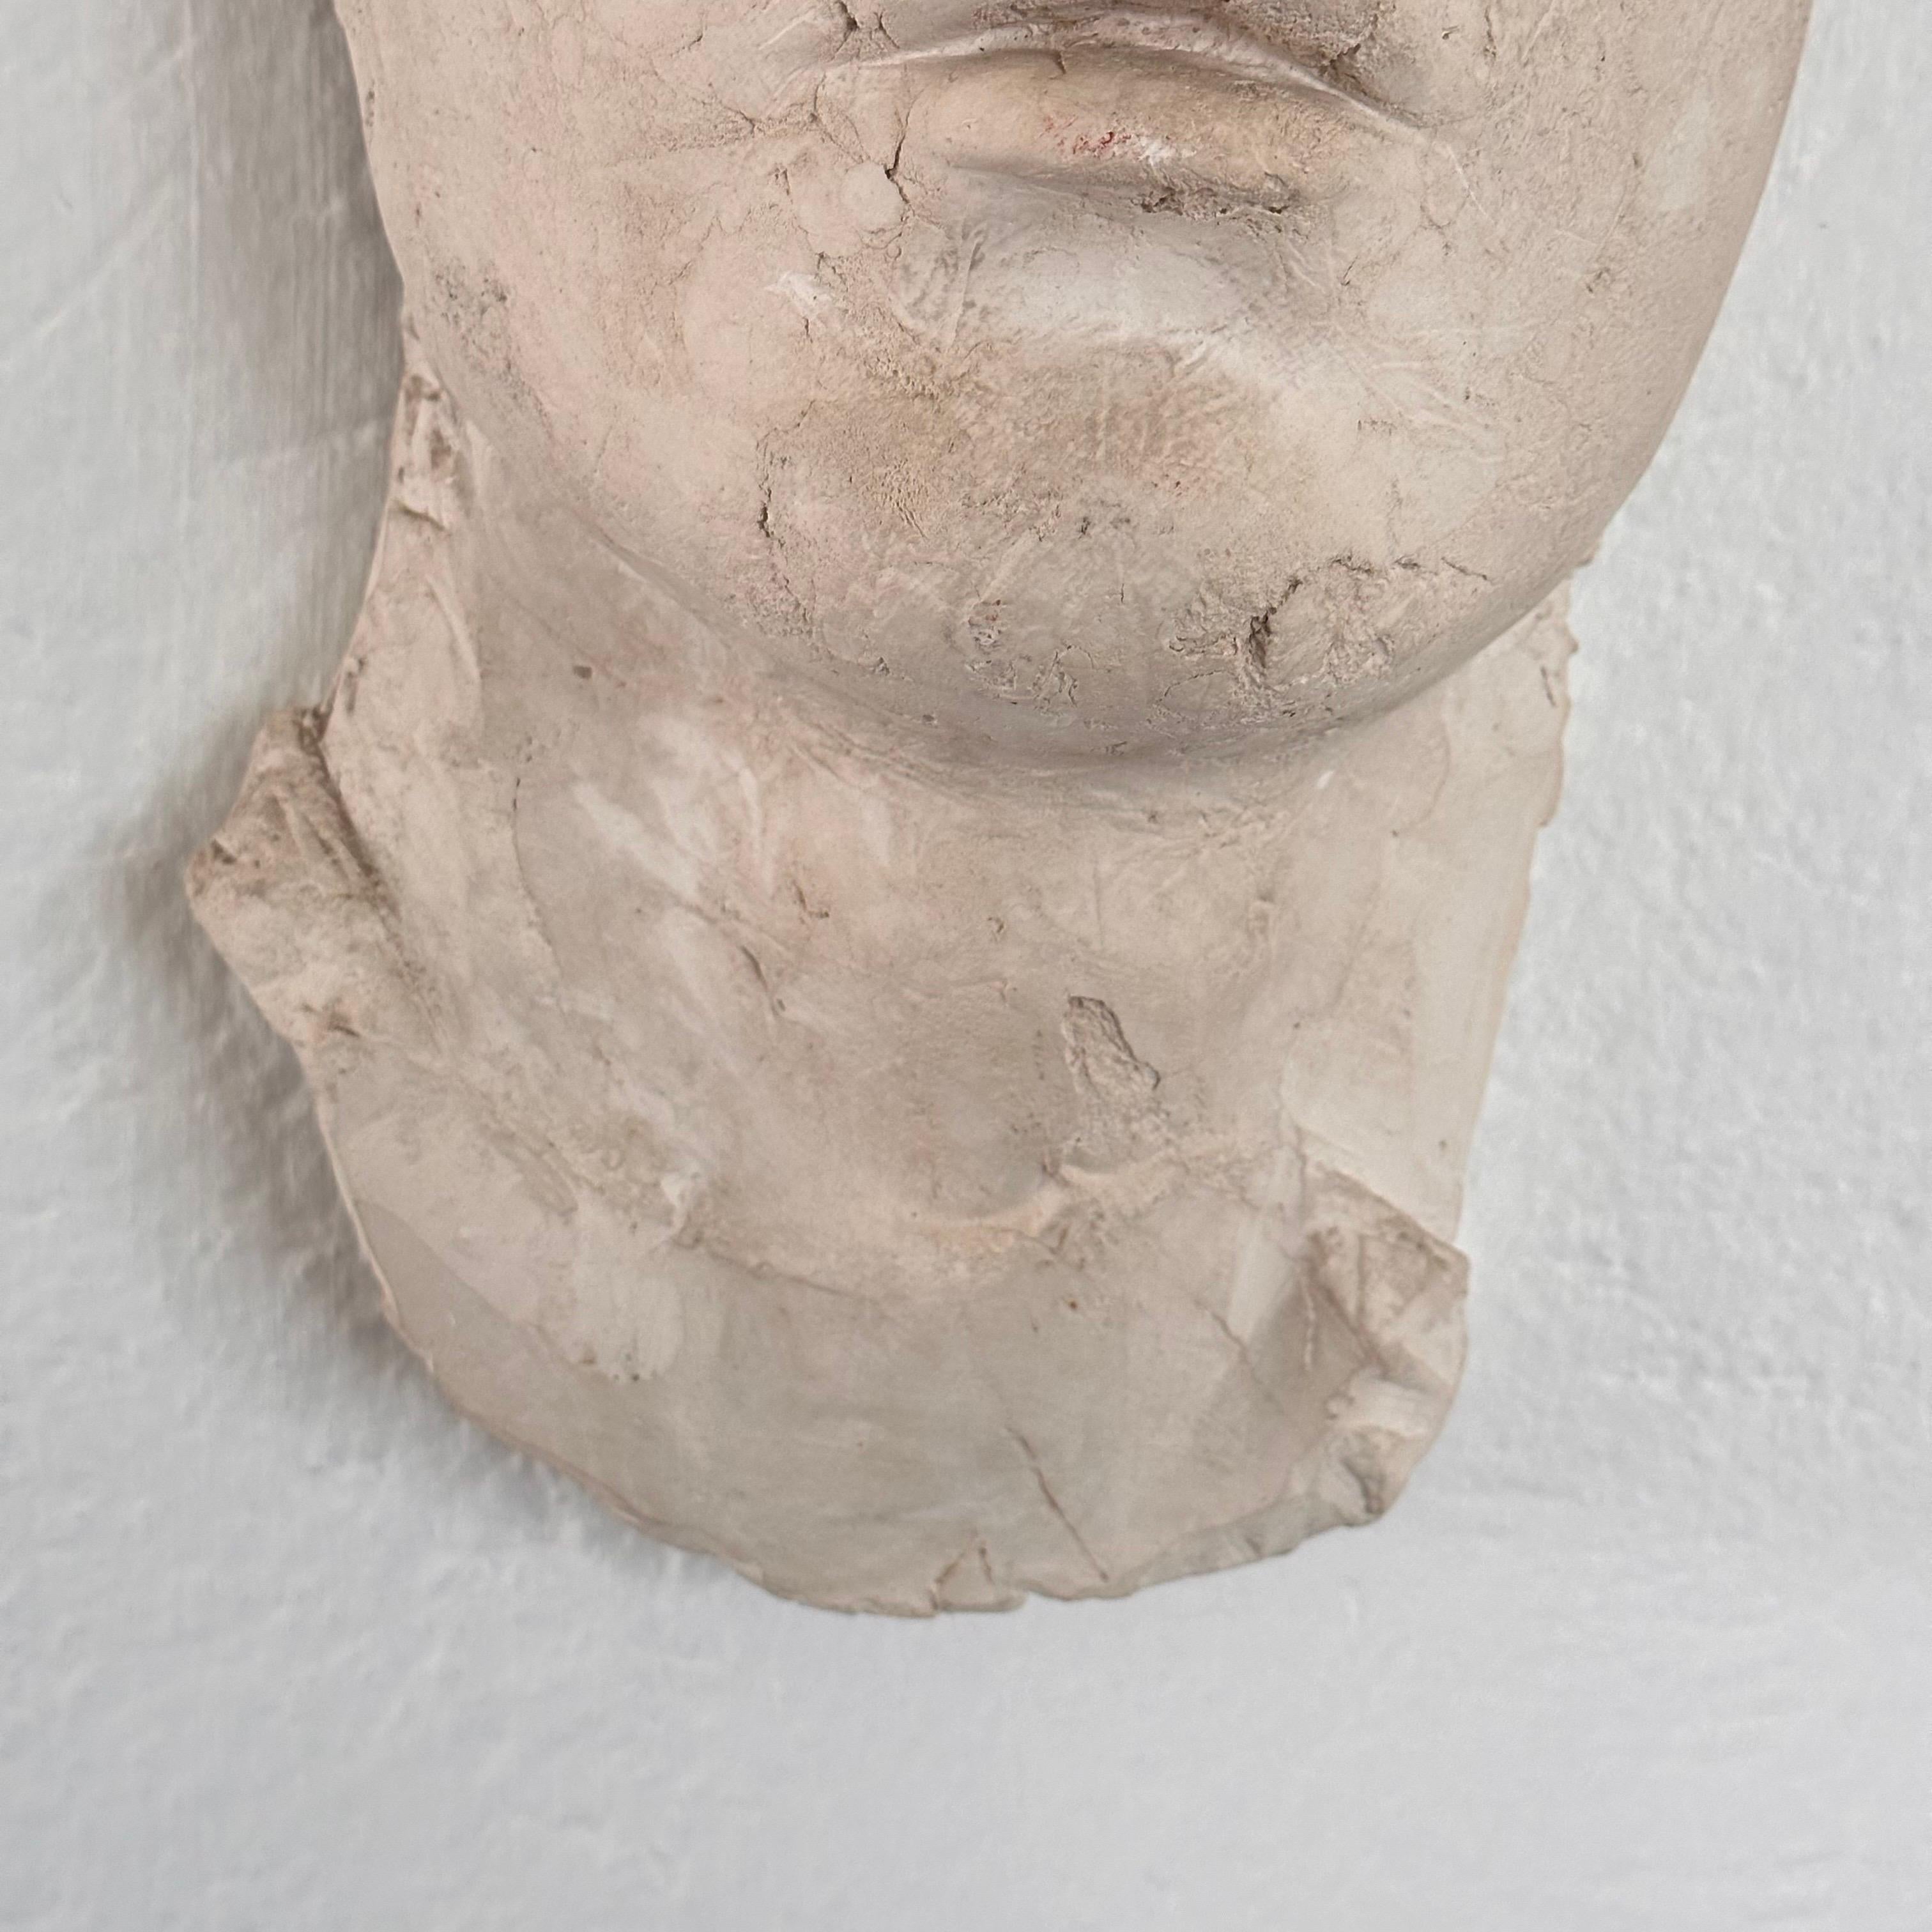 Stunning Decorative Roman Gypsum Face, 1970s Reproduction For Sale 8